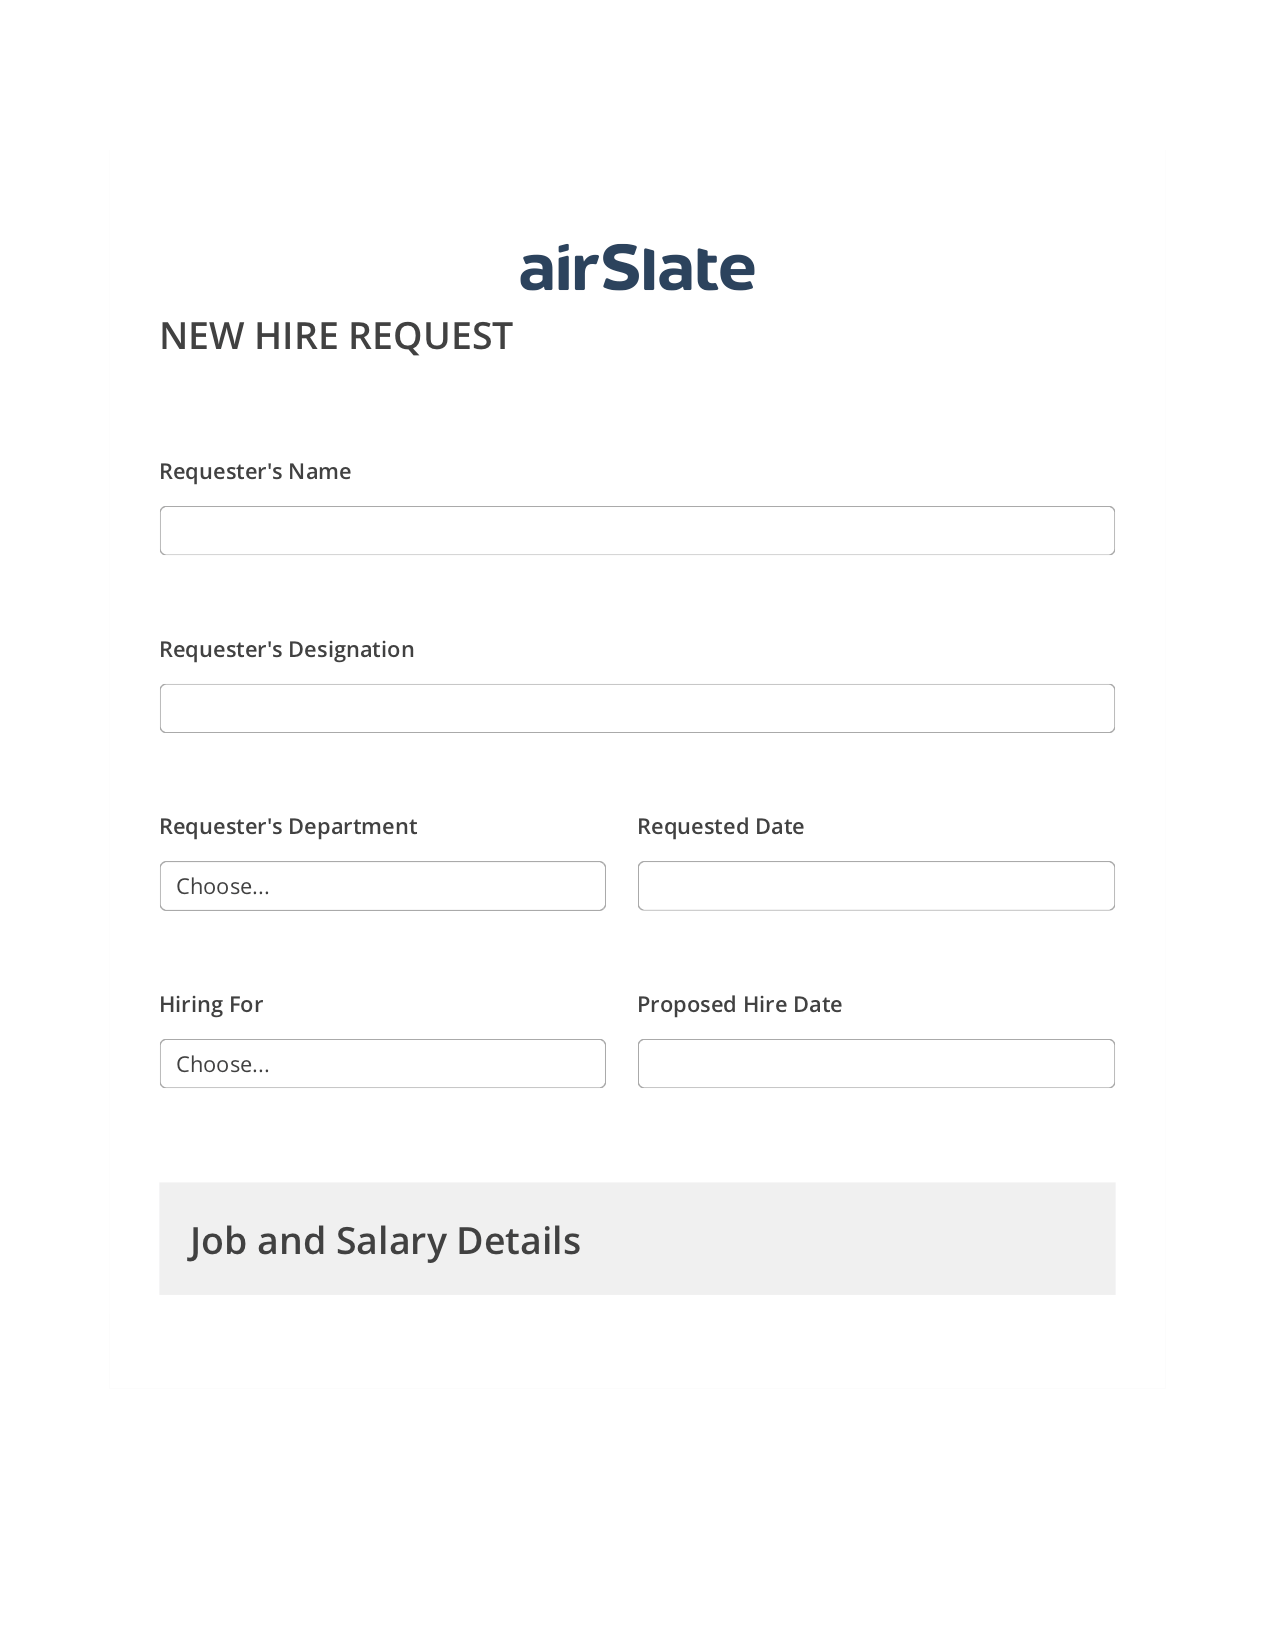 Hiring Request Workflow Pre-fill from CSV File Bot, Add Tags to Slate Bot, Archive to Box Bot